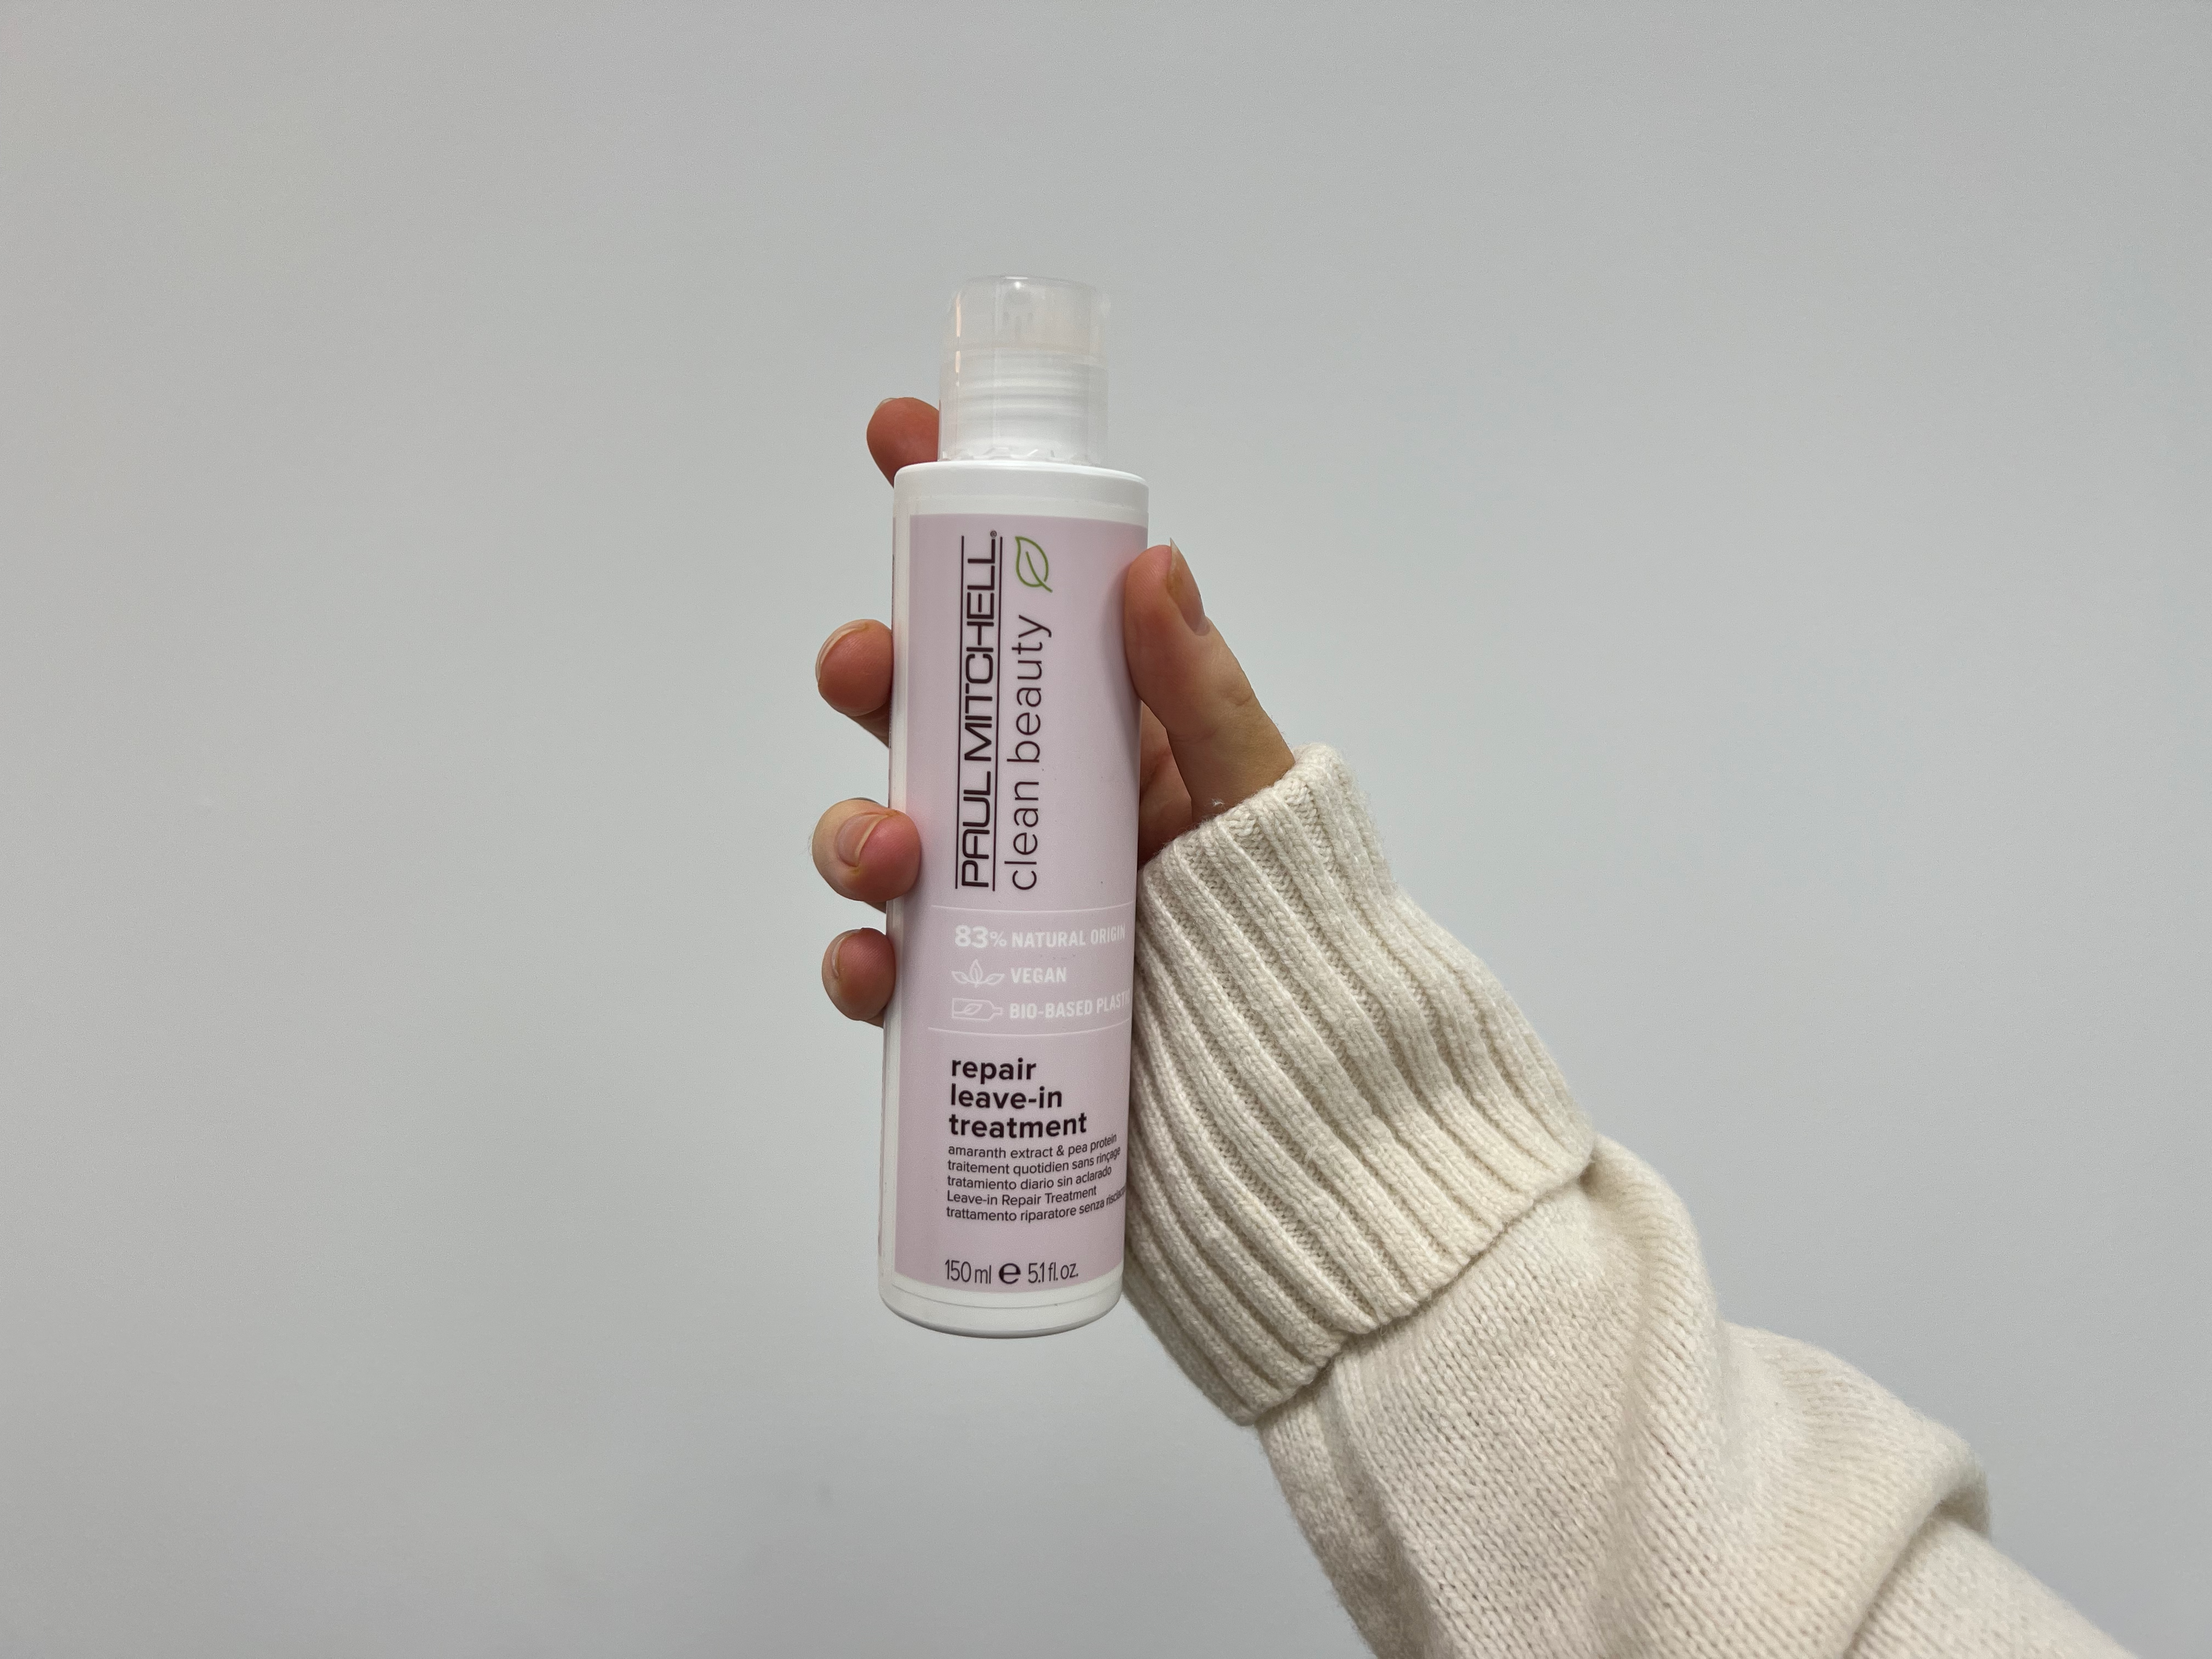 Paul Mitchell clean beauty repair leave-in treatment